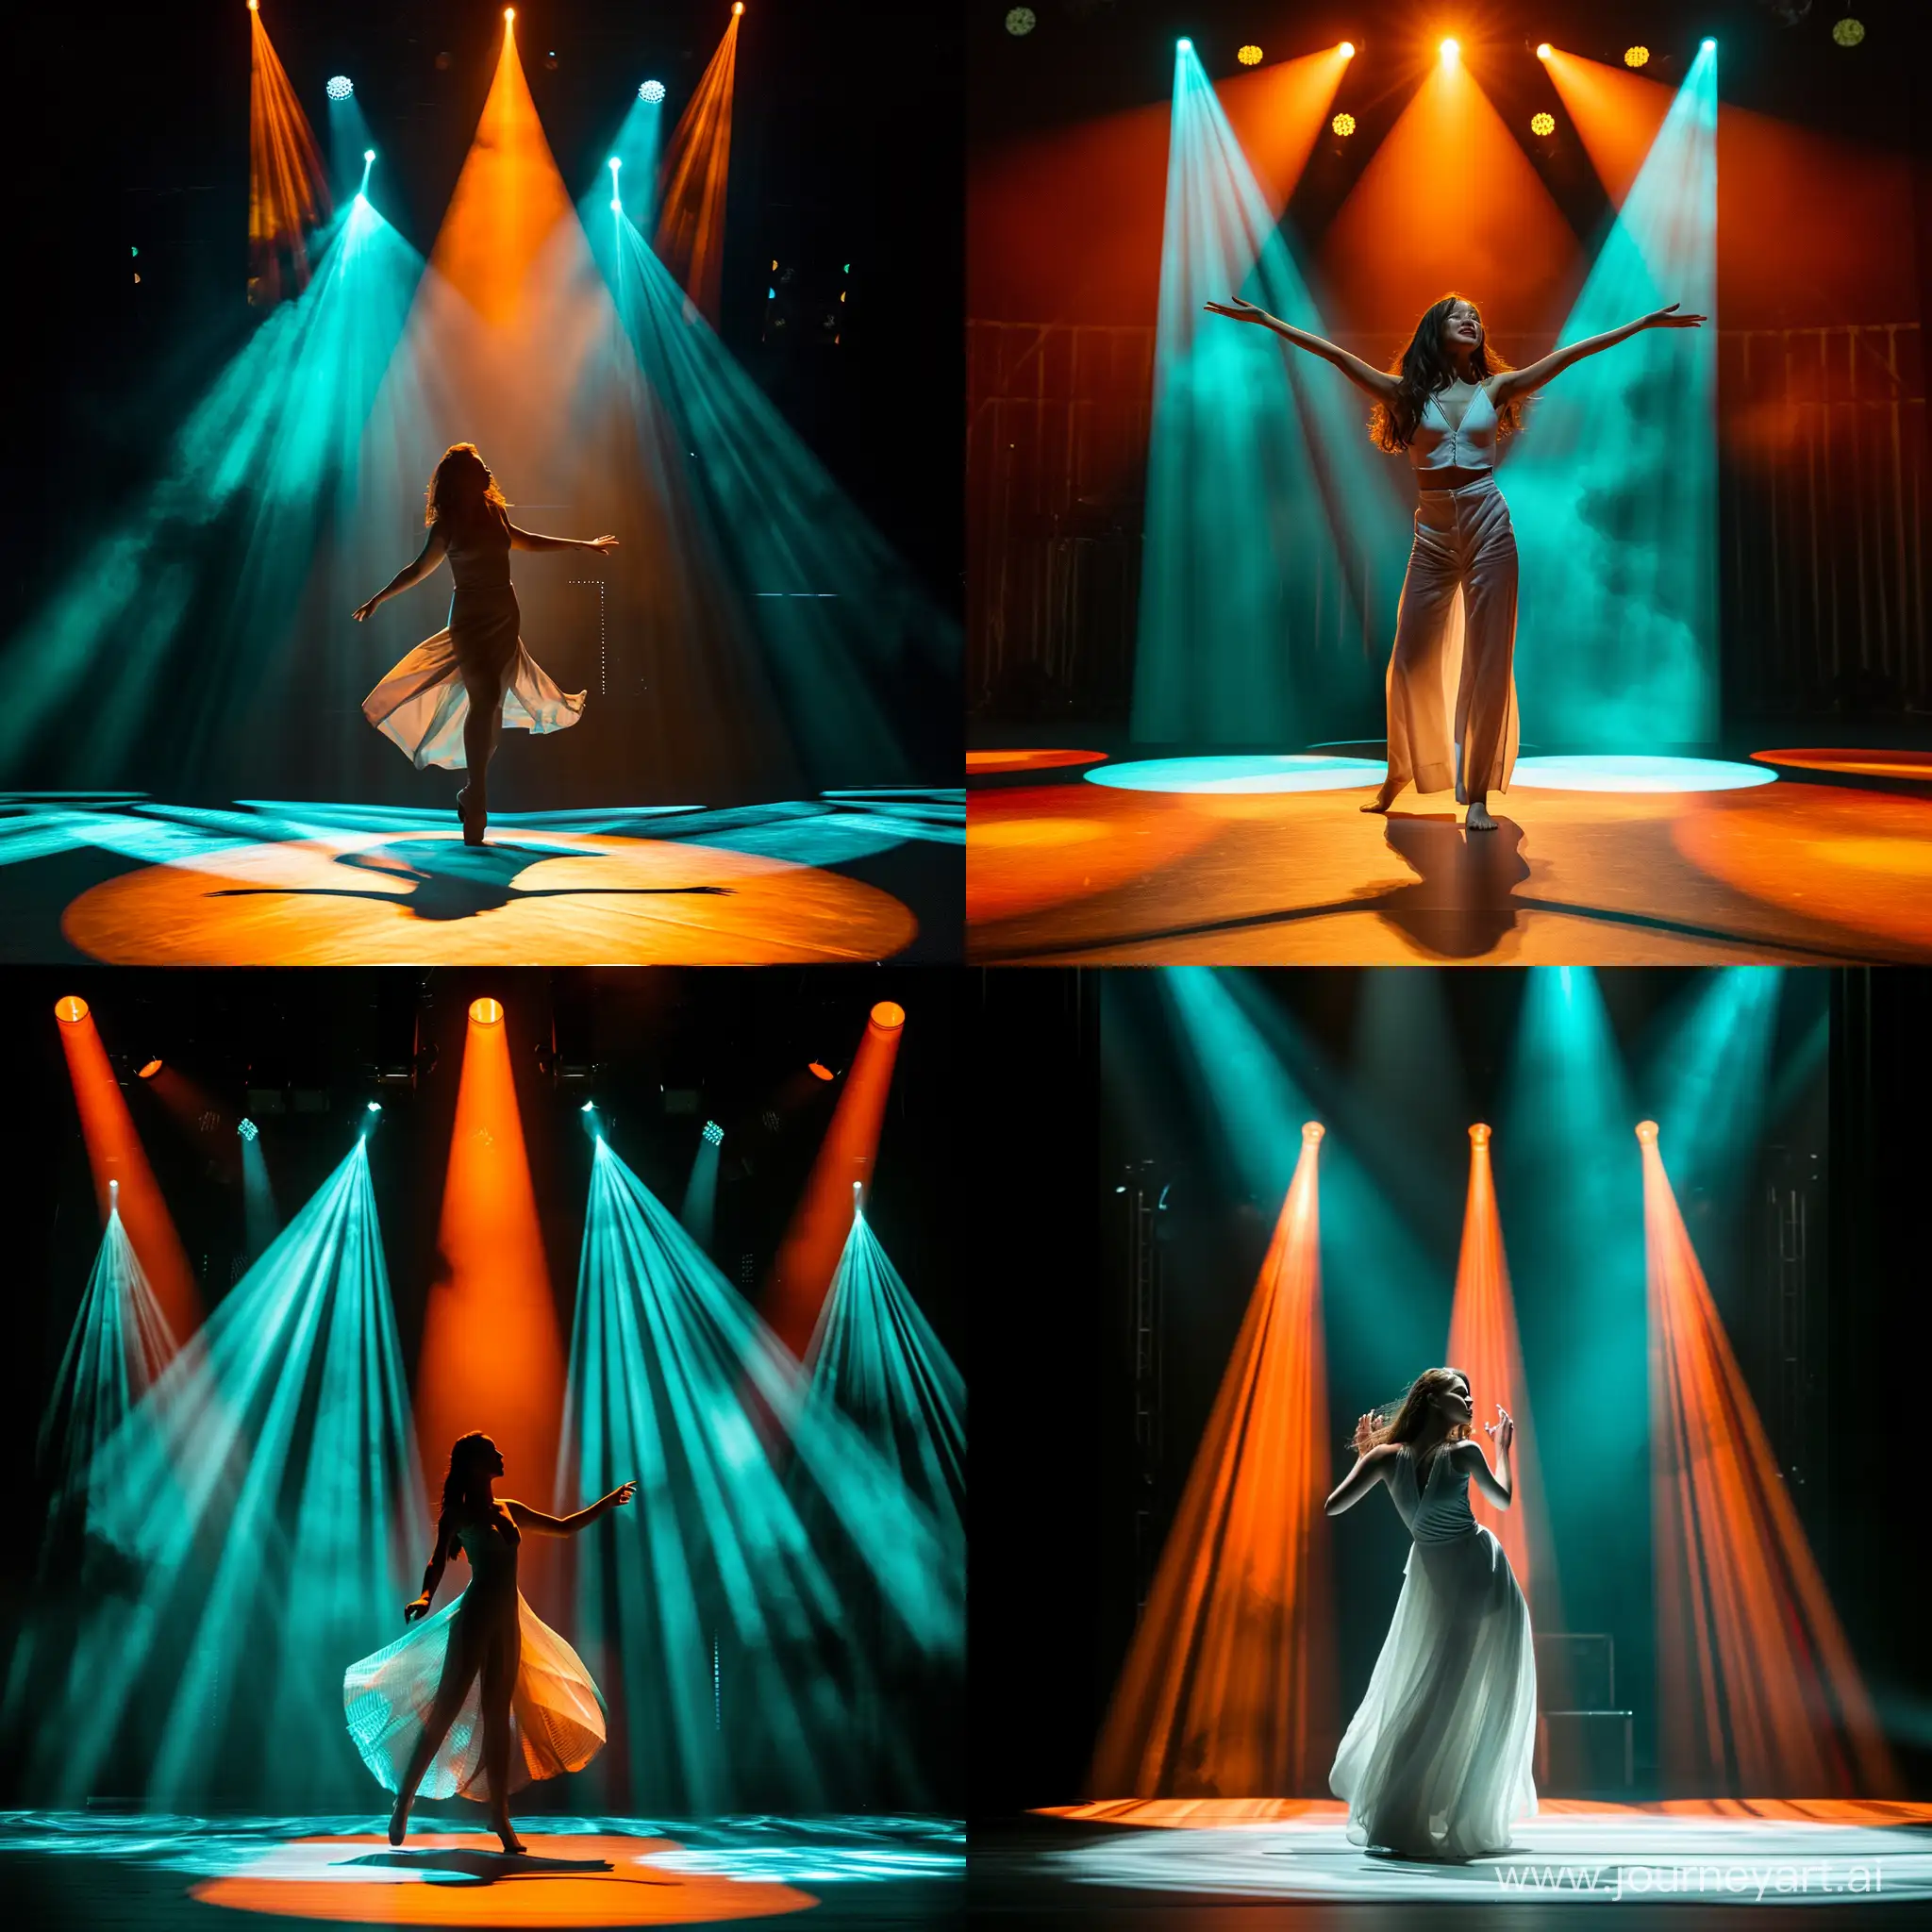 Enchanting-Stage-Dance-with-Orange-and-Turquoise-Spotlights